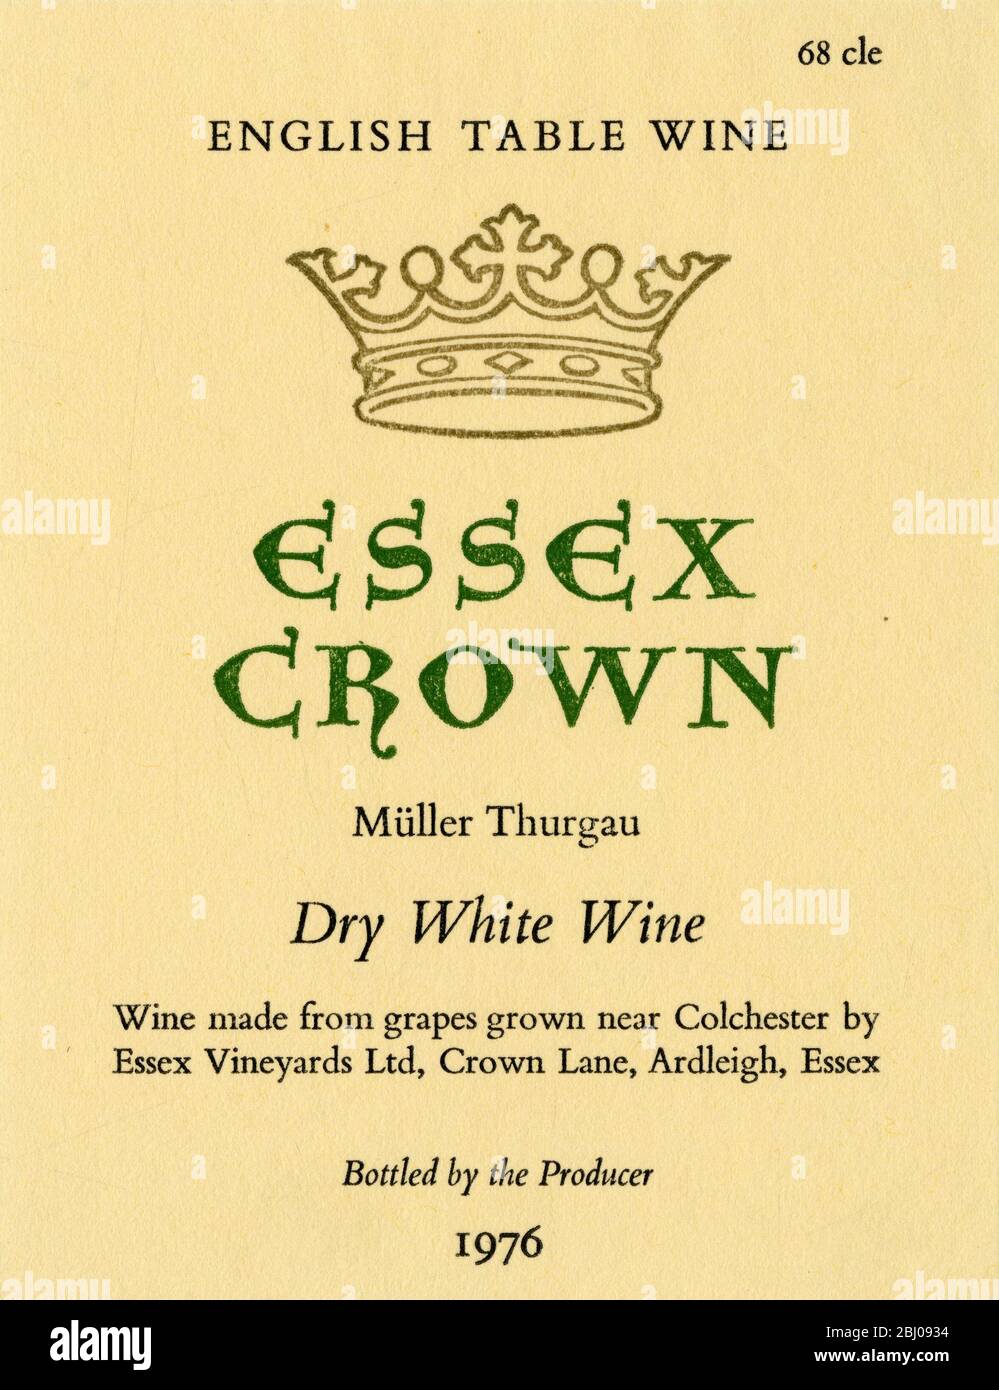 Wine Label. - English Table Wine. Essex Crown. Muller Thurgau. Dry White Wine Wine made from grapes grown near Colchester by Essex Vineyards Ltd, Crown lane, Ardleigh, Essex. - Bottled by the producer. 1976. - - Stock Photo